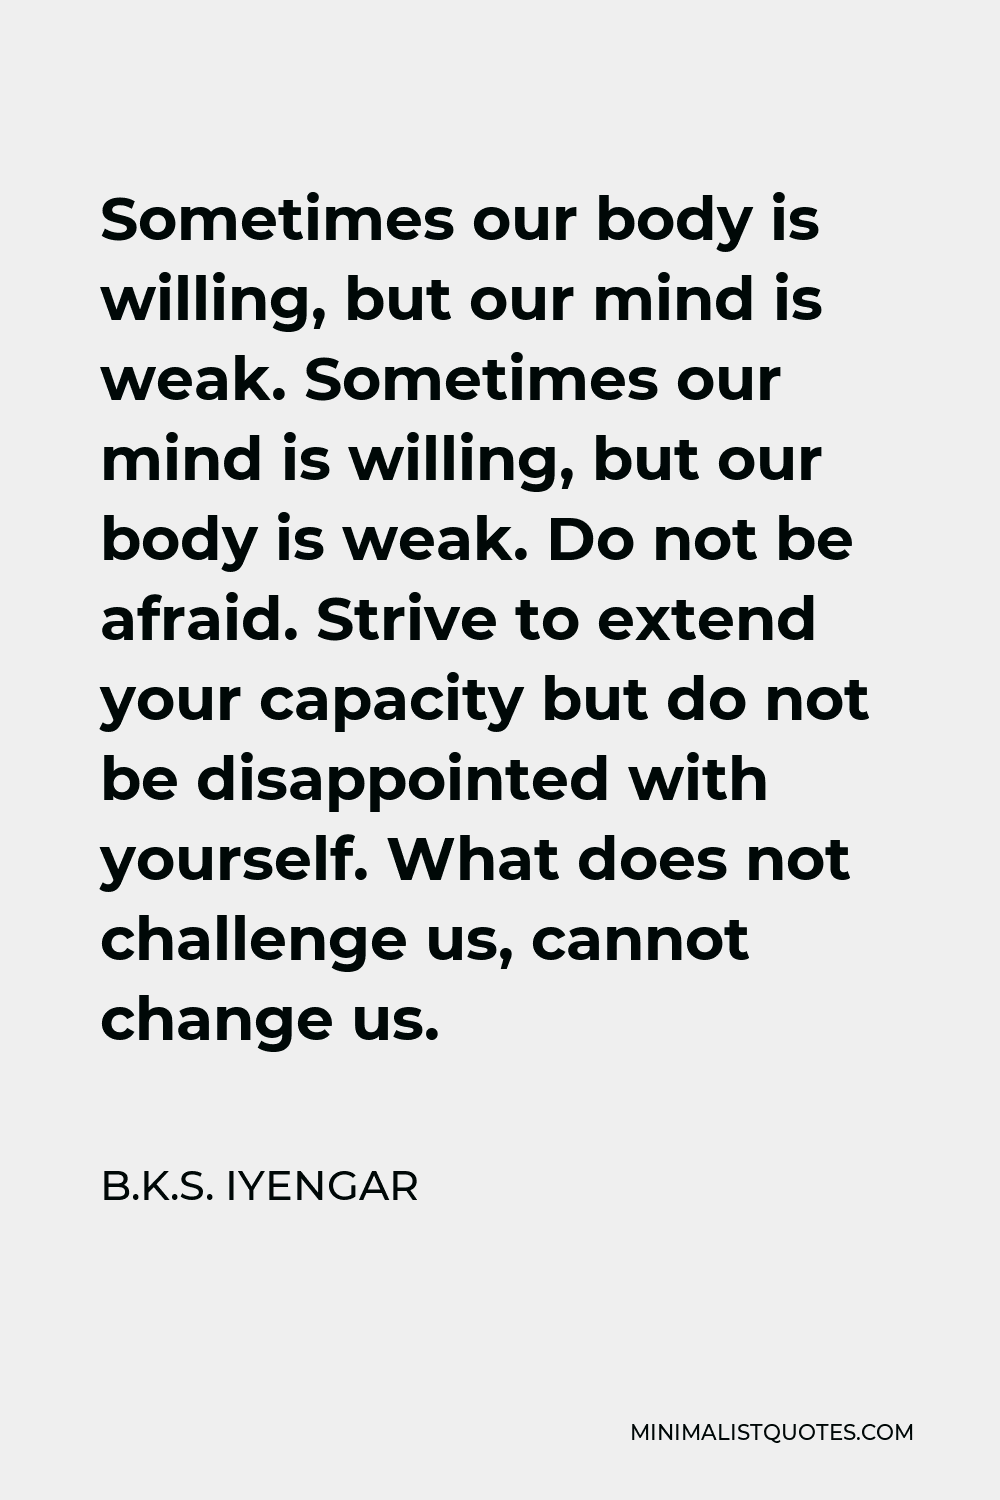 B.K.S. Iyengar Quote - Sometimes our body is willing, but our mind is weak. Sometimes our mind is willing, but our body is weak. Do not be afraid. Strive to extend your capacity but do not be disappointed with yourself. What does not challenge us, cannot change us.